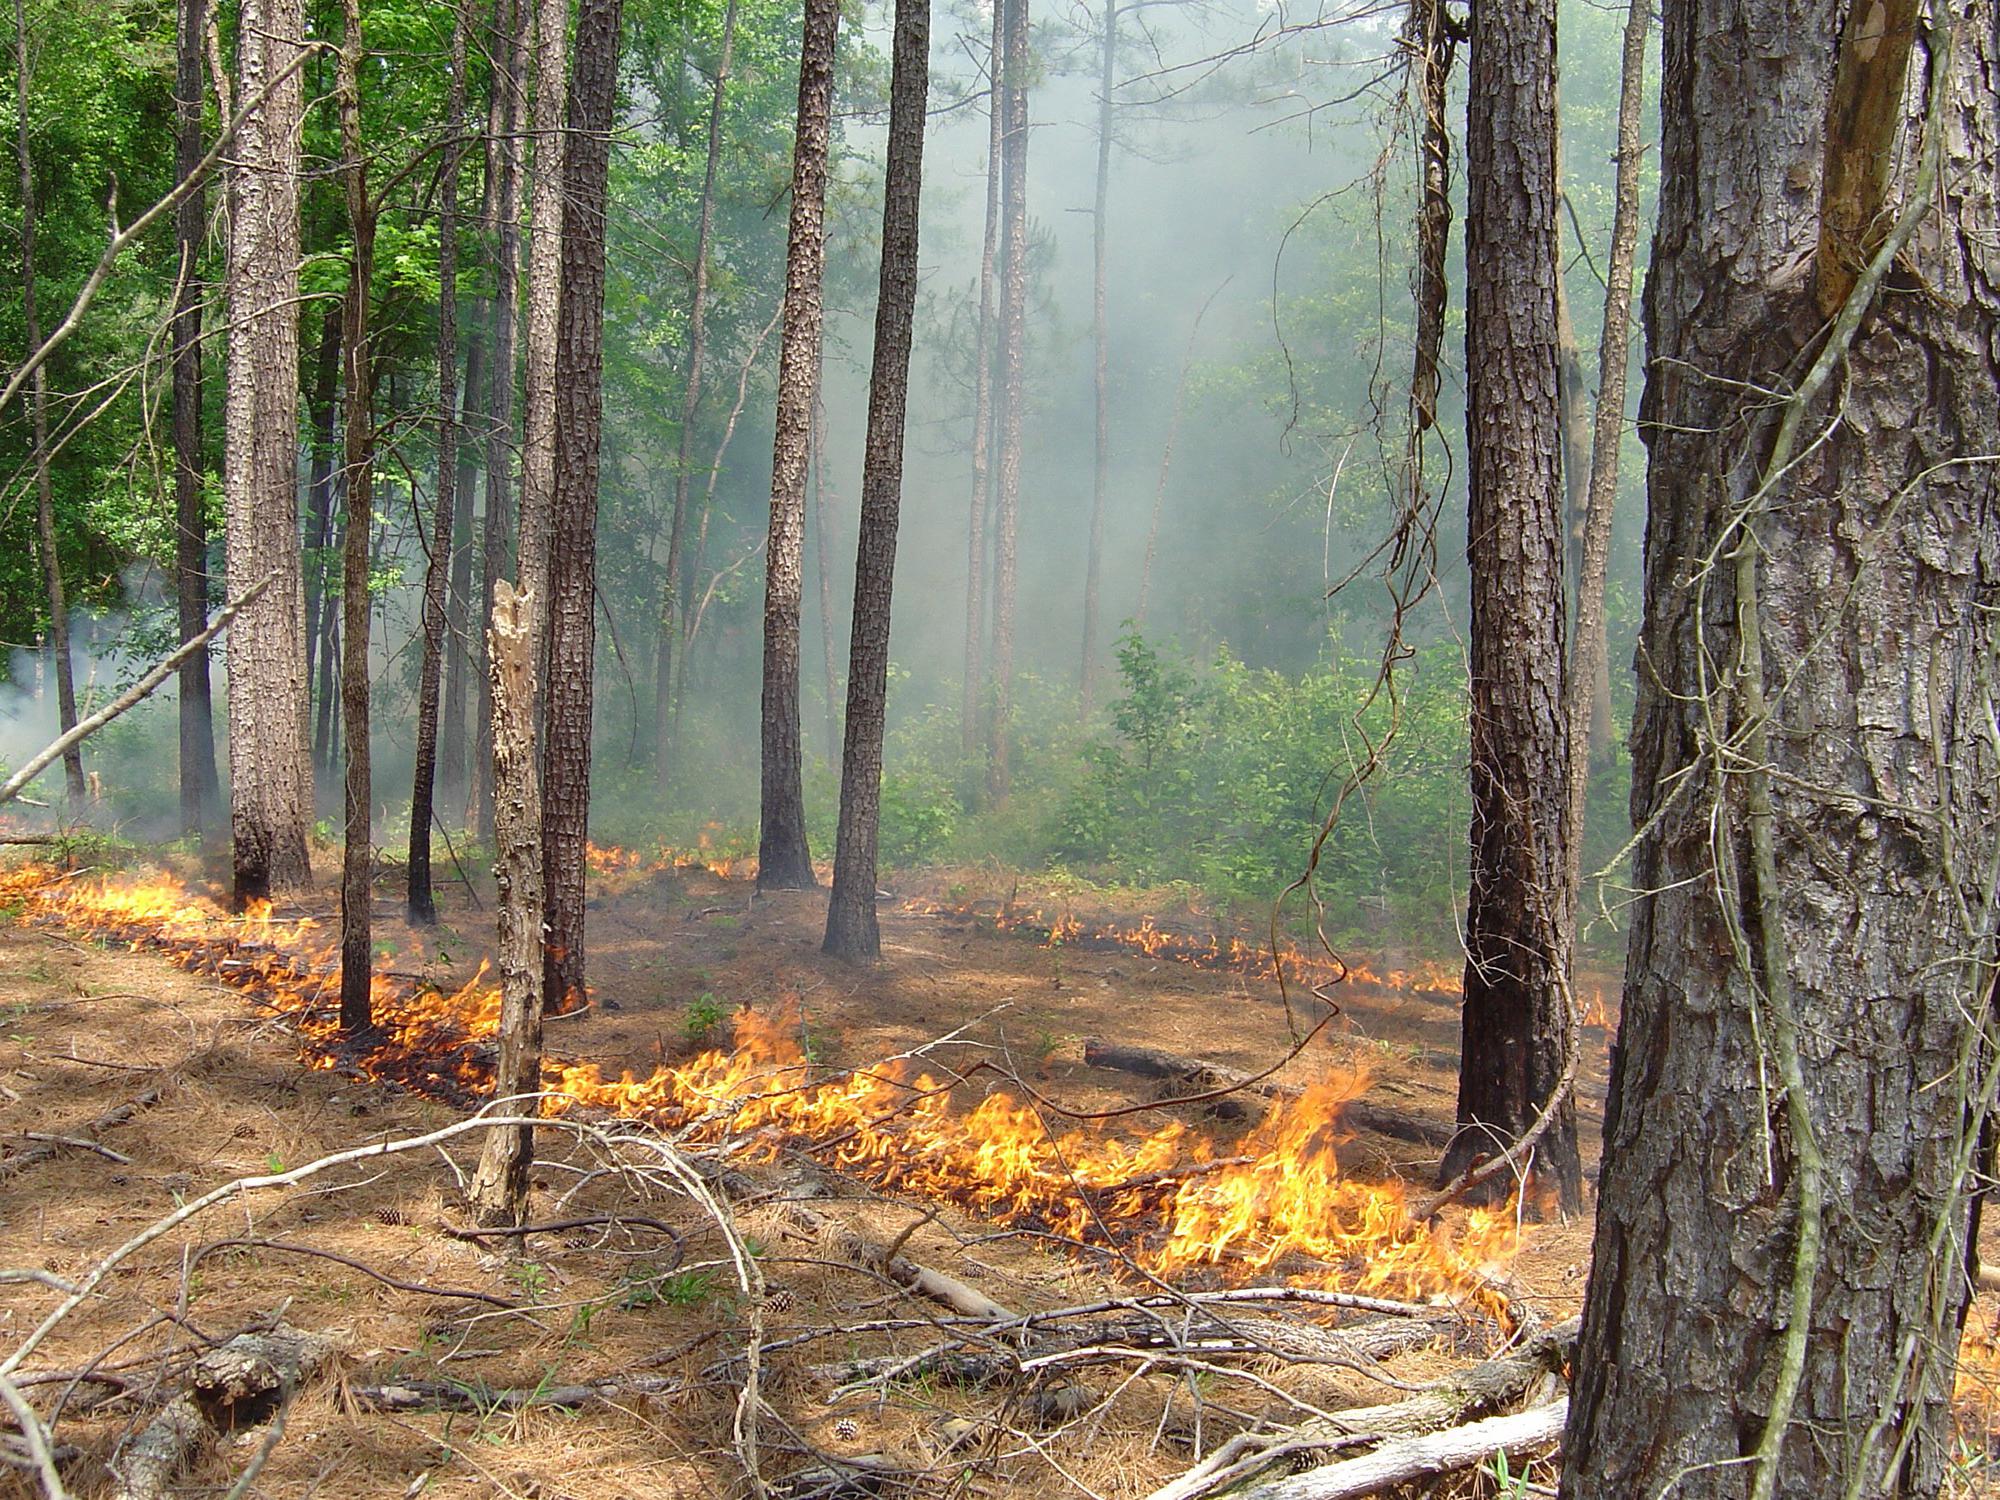 Ring of fire from a planned burn surrounds pine trees in a forest.